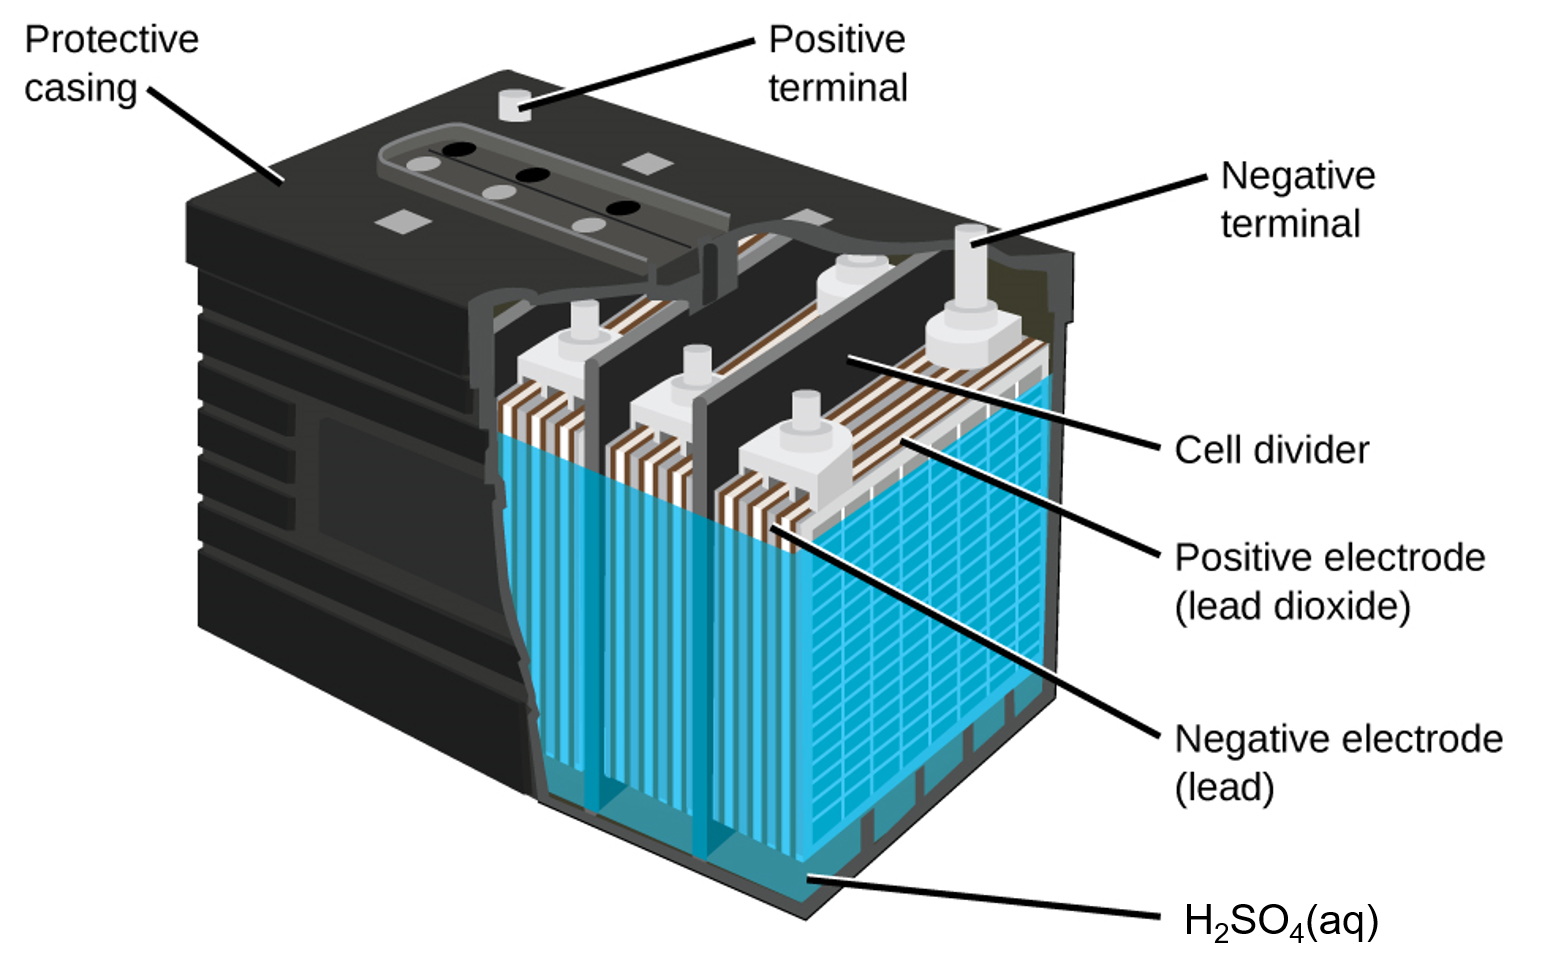 A diagram of a lead acid battery is shown. A black outer casing, which is labeled “Protective casing” is in the form of a rectangular prism. Grey cylindrical projections extend upward from the upper surface of the battery in the back left and back right corners. At the back right corner, the projection is labeled “Positive terminal.” At the back right corner, the projection is labeled “Negative terminal.” The bottom layer of the battery diagram is a dark green color, which is labeled “H subscript 2 S O subscript 4.” A blue outer covering extends upward from this region near the top of the battery. Inside, alternating grey and white vertical “sheets” are packed together in repeating units within the battery. The battery has the sides cut away to show three of these repeating units which are separated by black vertical dividers, which are labeled as “cell dividers.” The grey layers in the repeating units are labeled “Negative electrode (lead).” The white layers are labeled “Postive electrode (lead dioxide).”